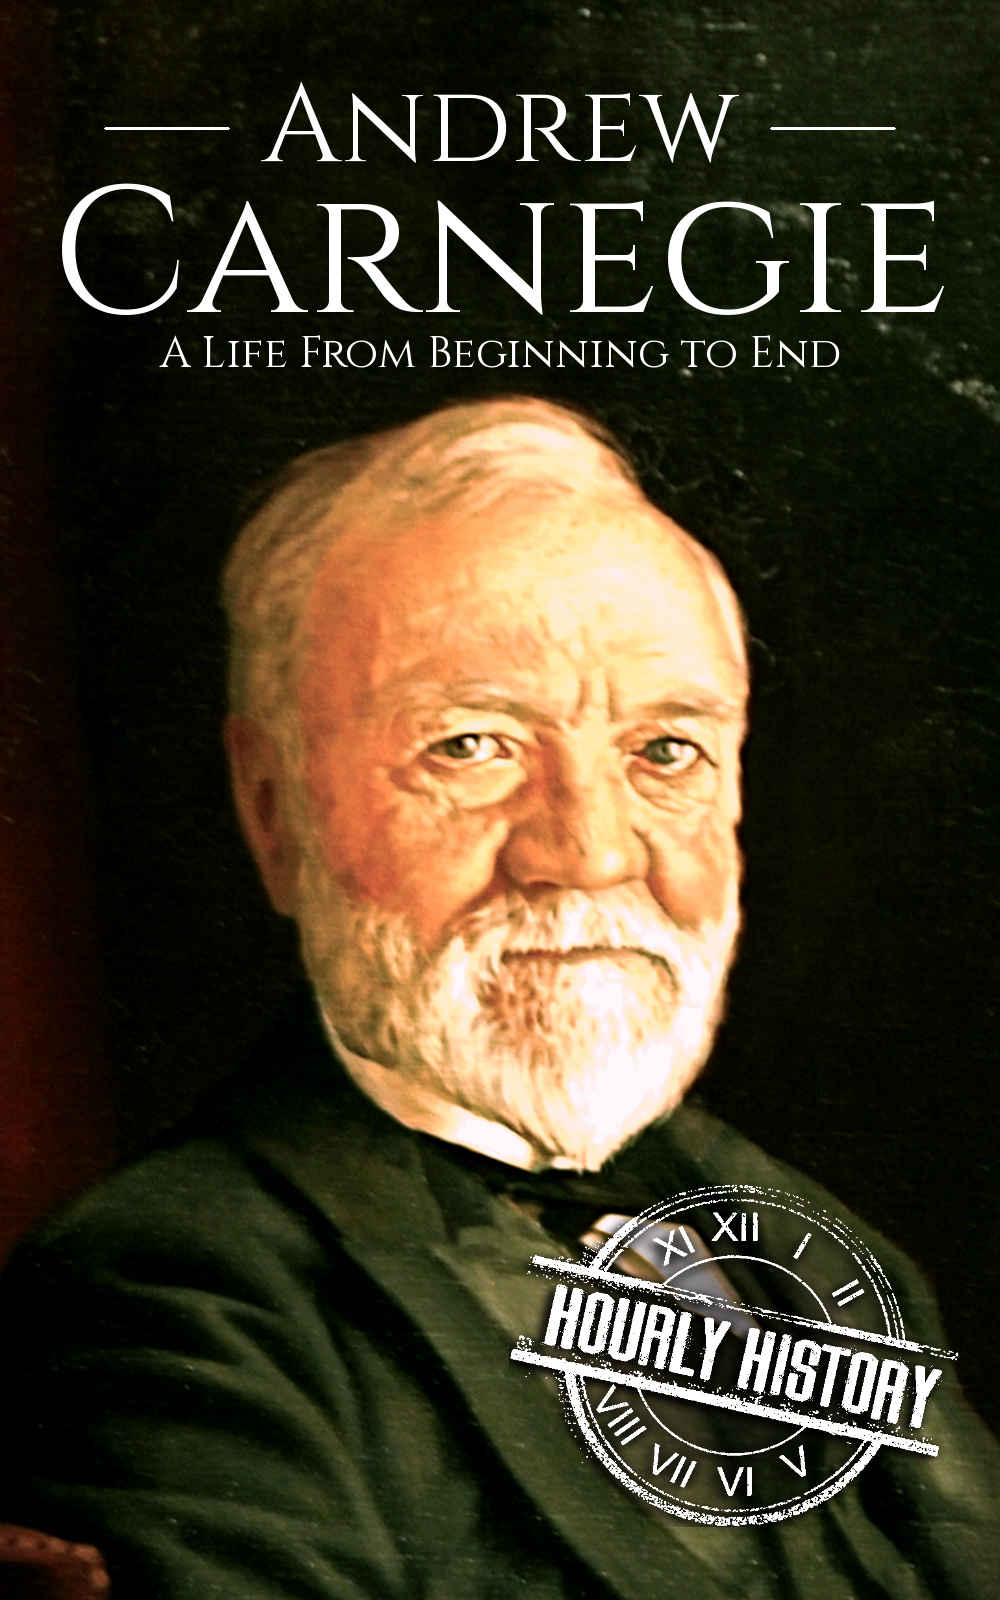 Andrew Carnegie: A Life From Beginning to End